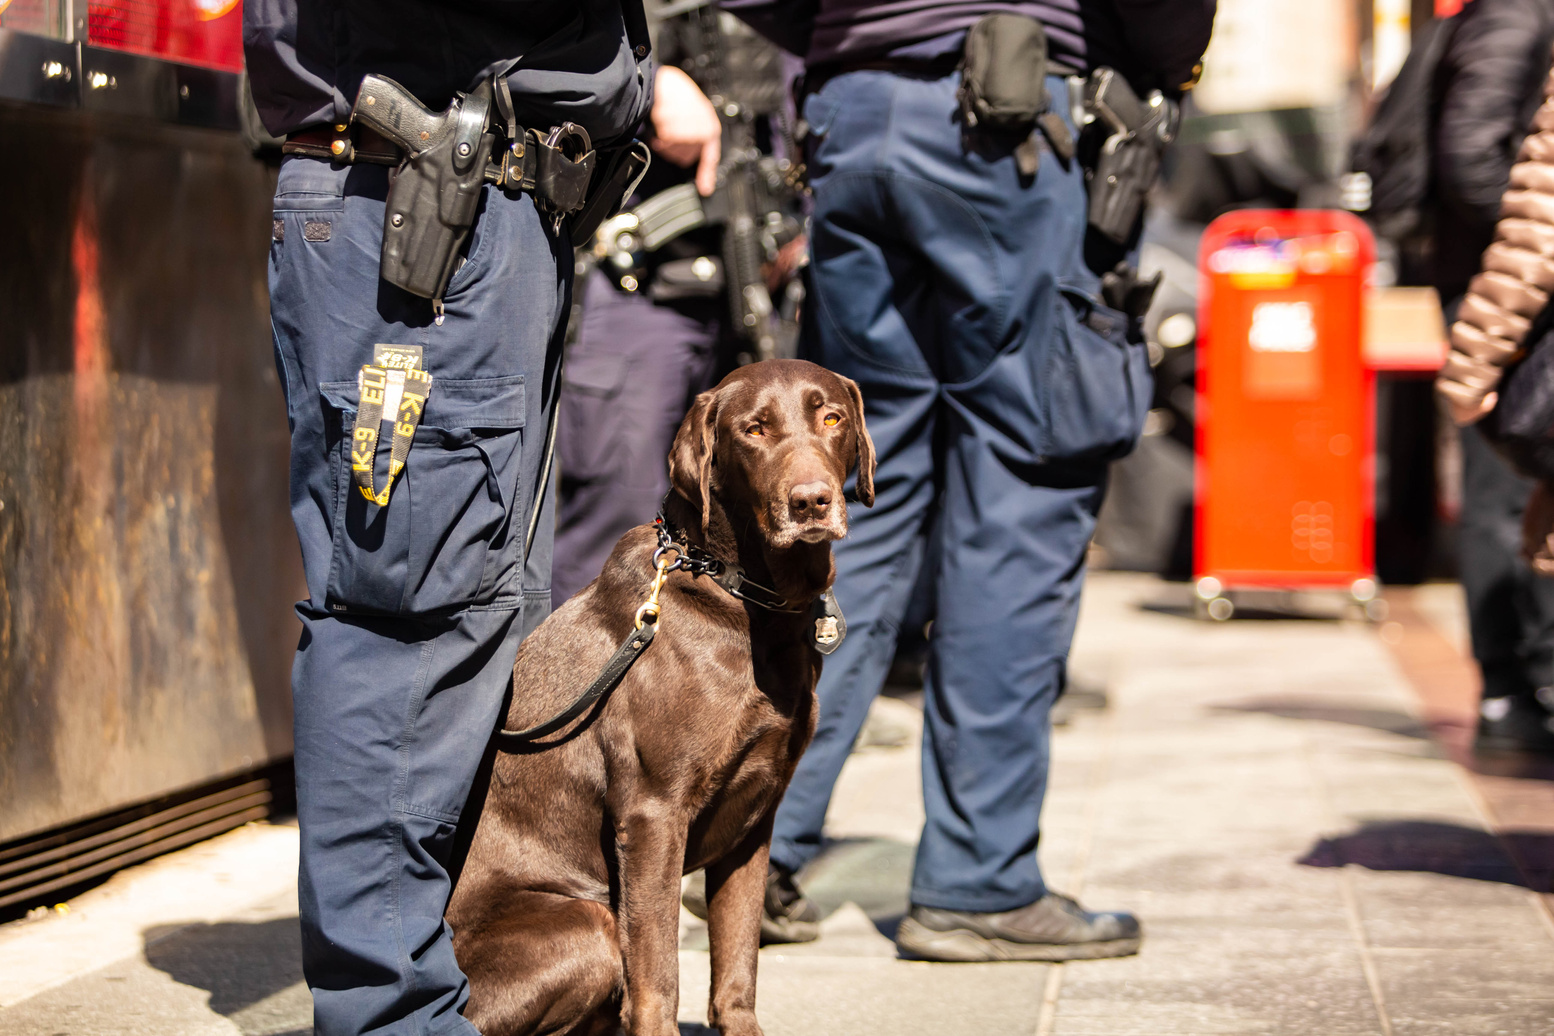 K9 Police Dog Together with Officer on Duty